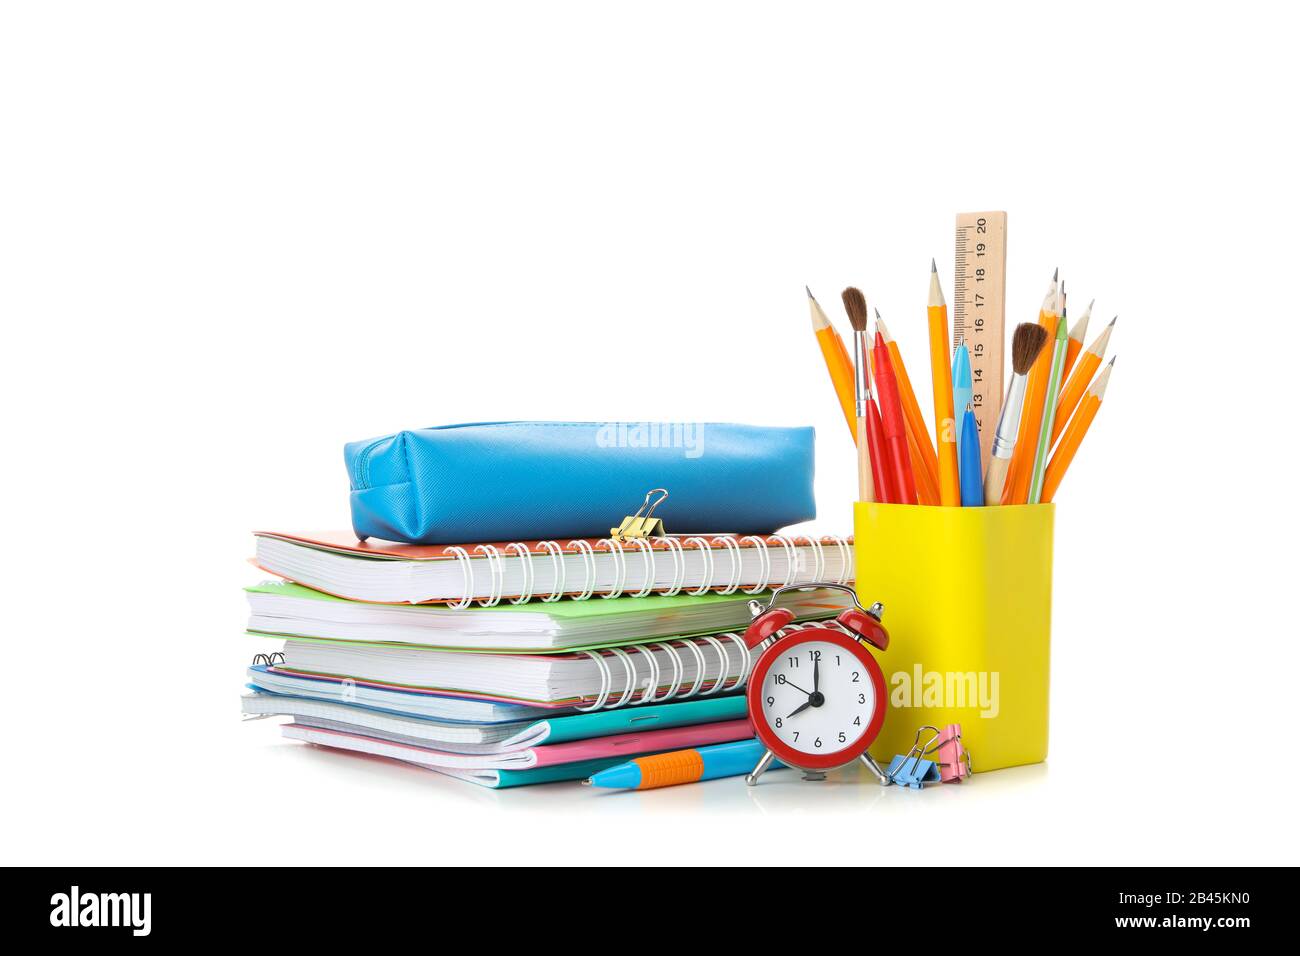 Back To School Elementary Education Cartoon Stationery Supplies Bag Map  Pencil Books Stock Illustration - Download Image Now - iStock